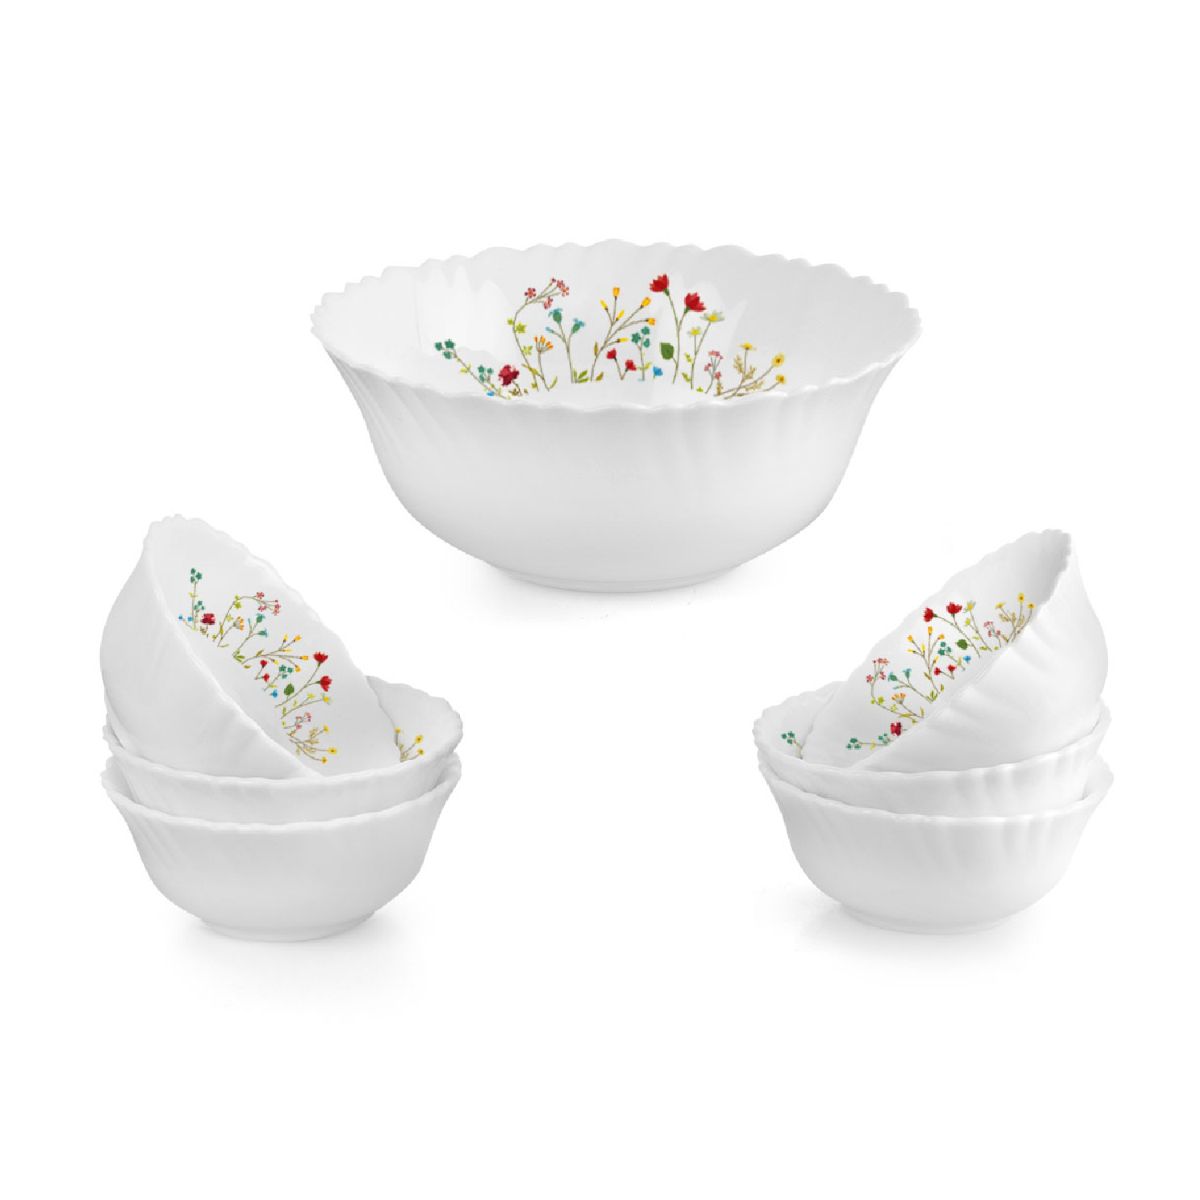 Dazzle Series Pudding Gift Set, 7 Pieces Hanging Garden / 7 Pieces